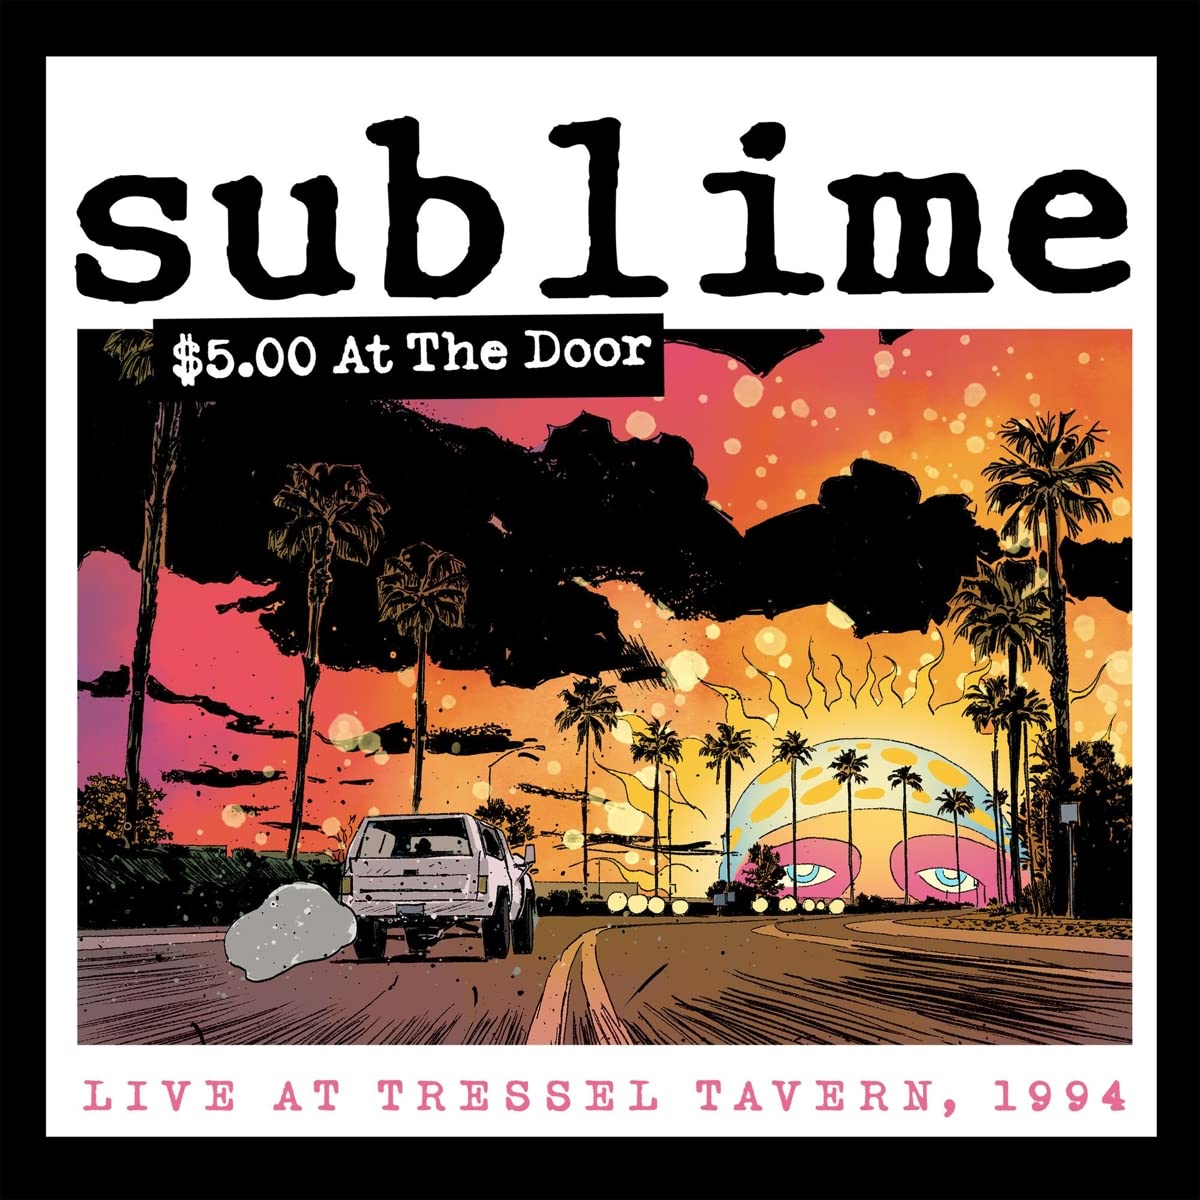 Sublime $5 AT THE DOOR - LIVE 1994 New Sealed Yellow Colored Vinyl 2 LP